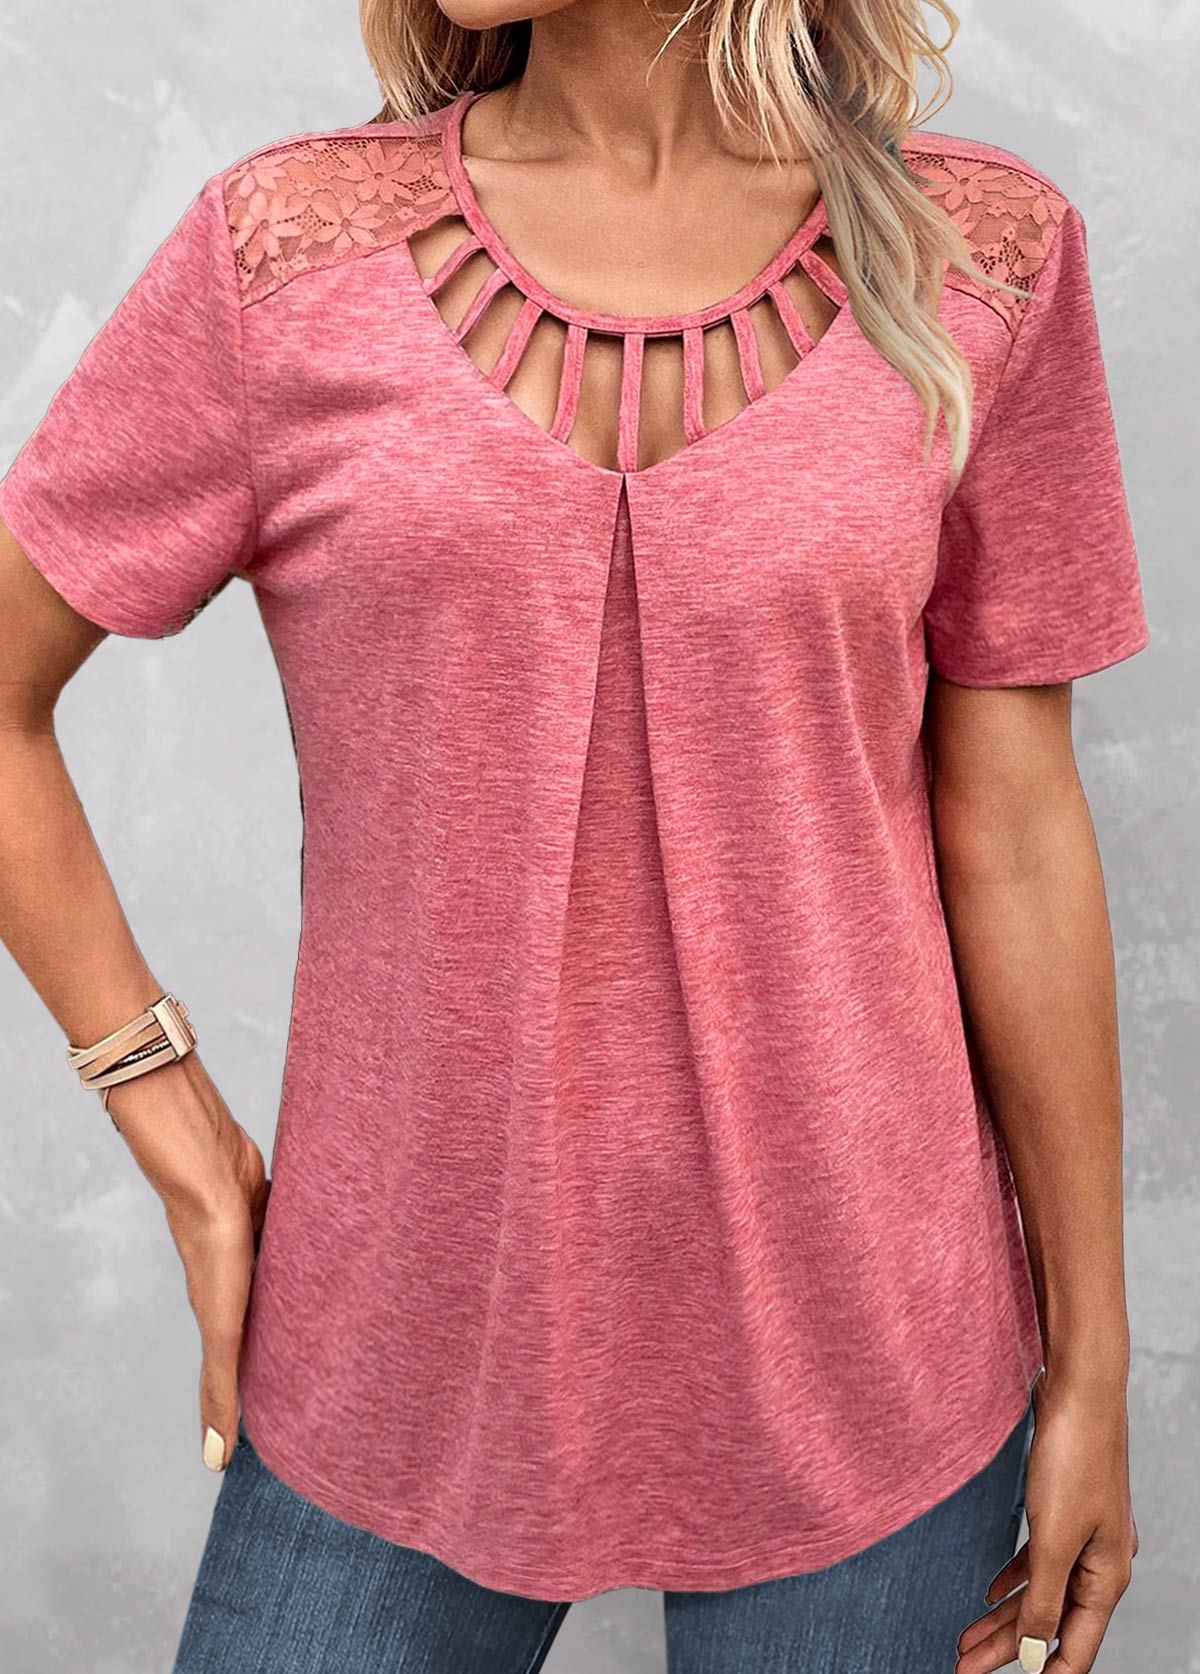 Cage Neck Lace Peach Red Short Sleeve T Shirt